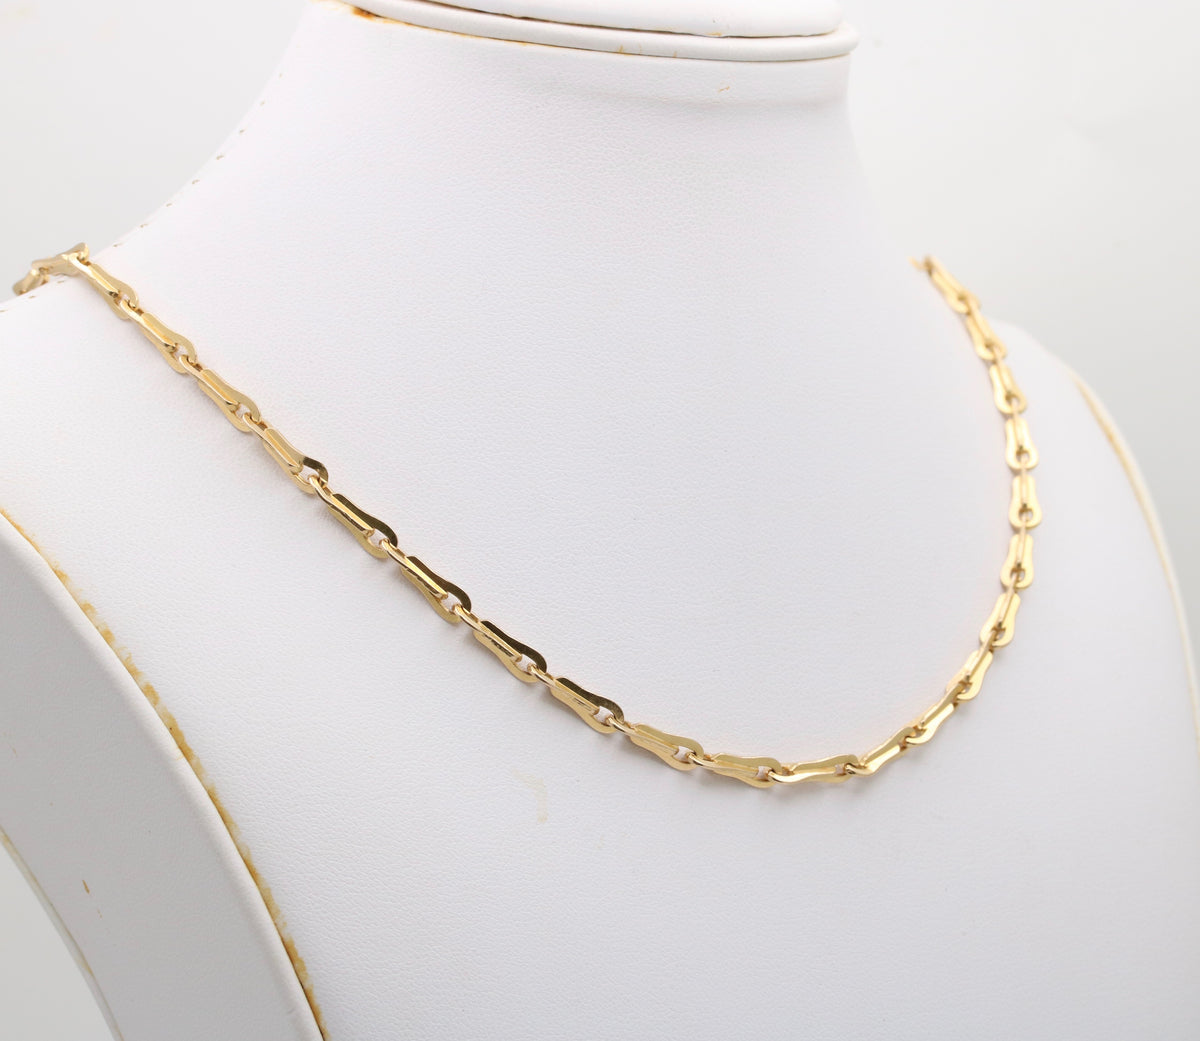 Vintage 14K Gold Avocado Style Link Chain, 24” Long